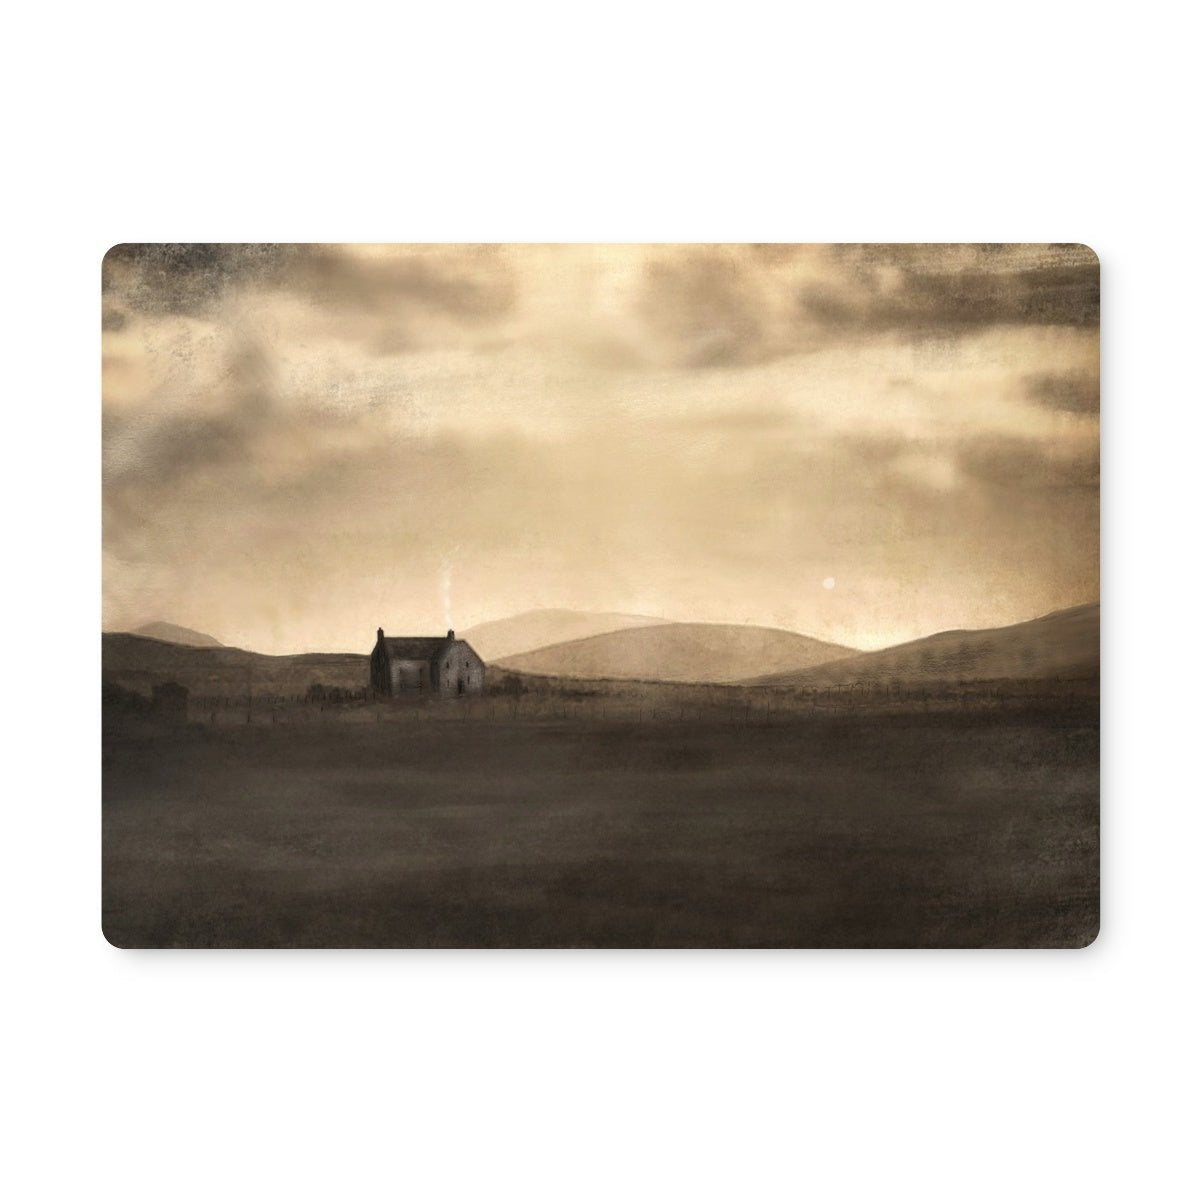 A Moonlit Croft Art Gifts Placemat-Placemats-Hebridean Islands Art Gallery-4 Placemats-Paintings, Prints, Homeware, Art Gifts From Scotland By Scottish Artist Kevin Hunter